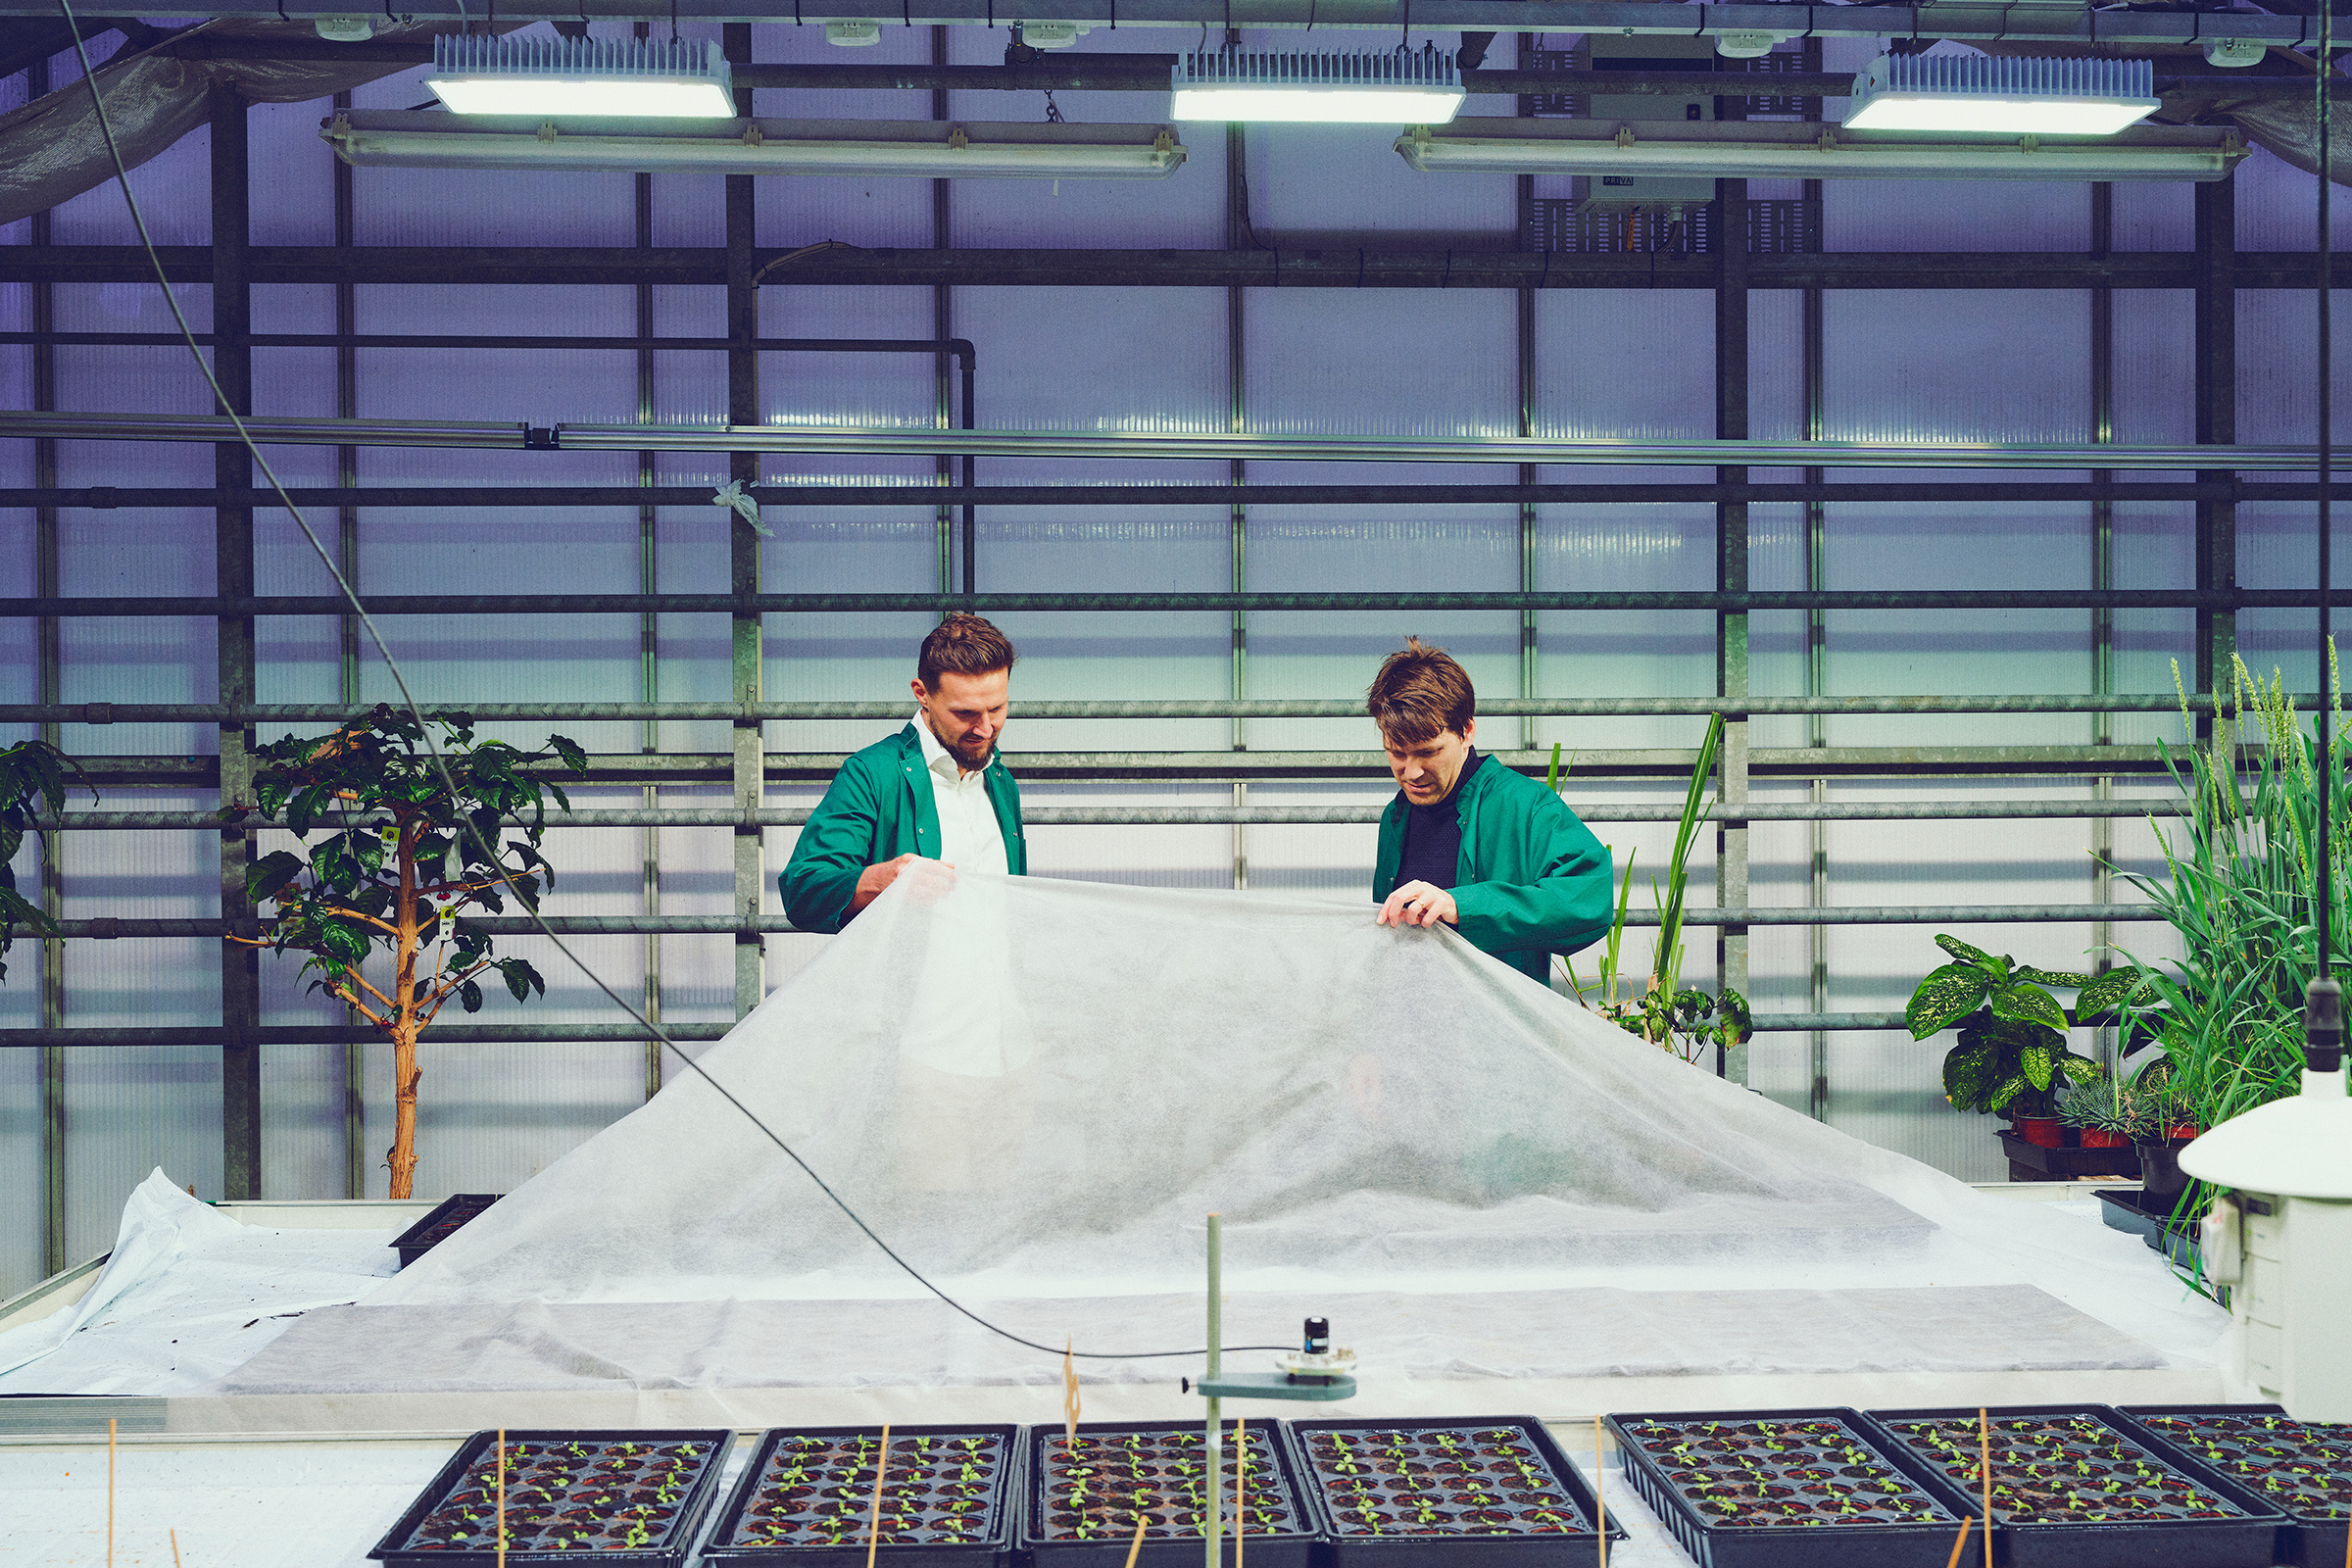 Jon Christensen, Left, and Johan Andersen-Ranberg of TriptoBio at a greenhouse used to grow various plants for research purposes at the University of Copenhagen in Feb. 16. This Danish biotech startup will allow a key rare ingredient to be grown in labs. (Thomas Nielsen)